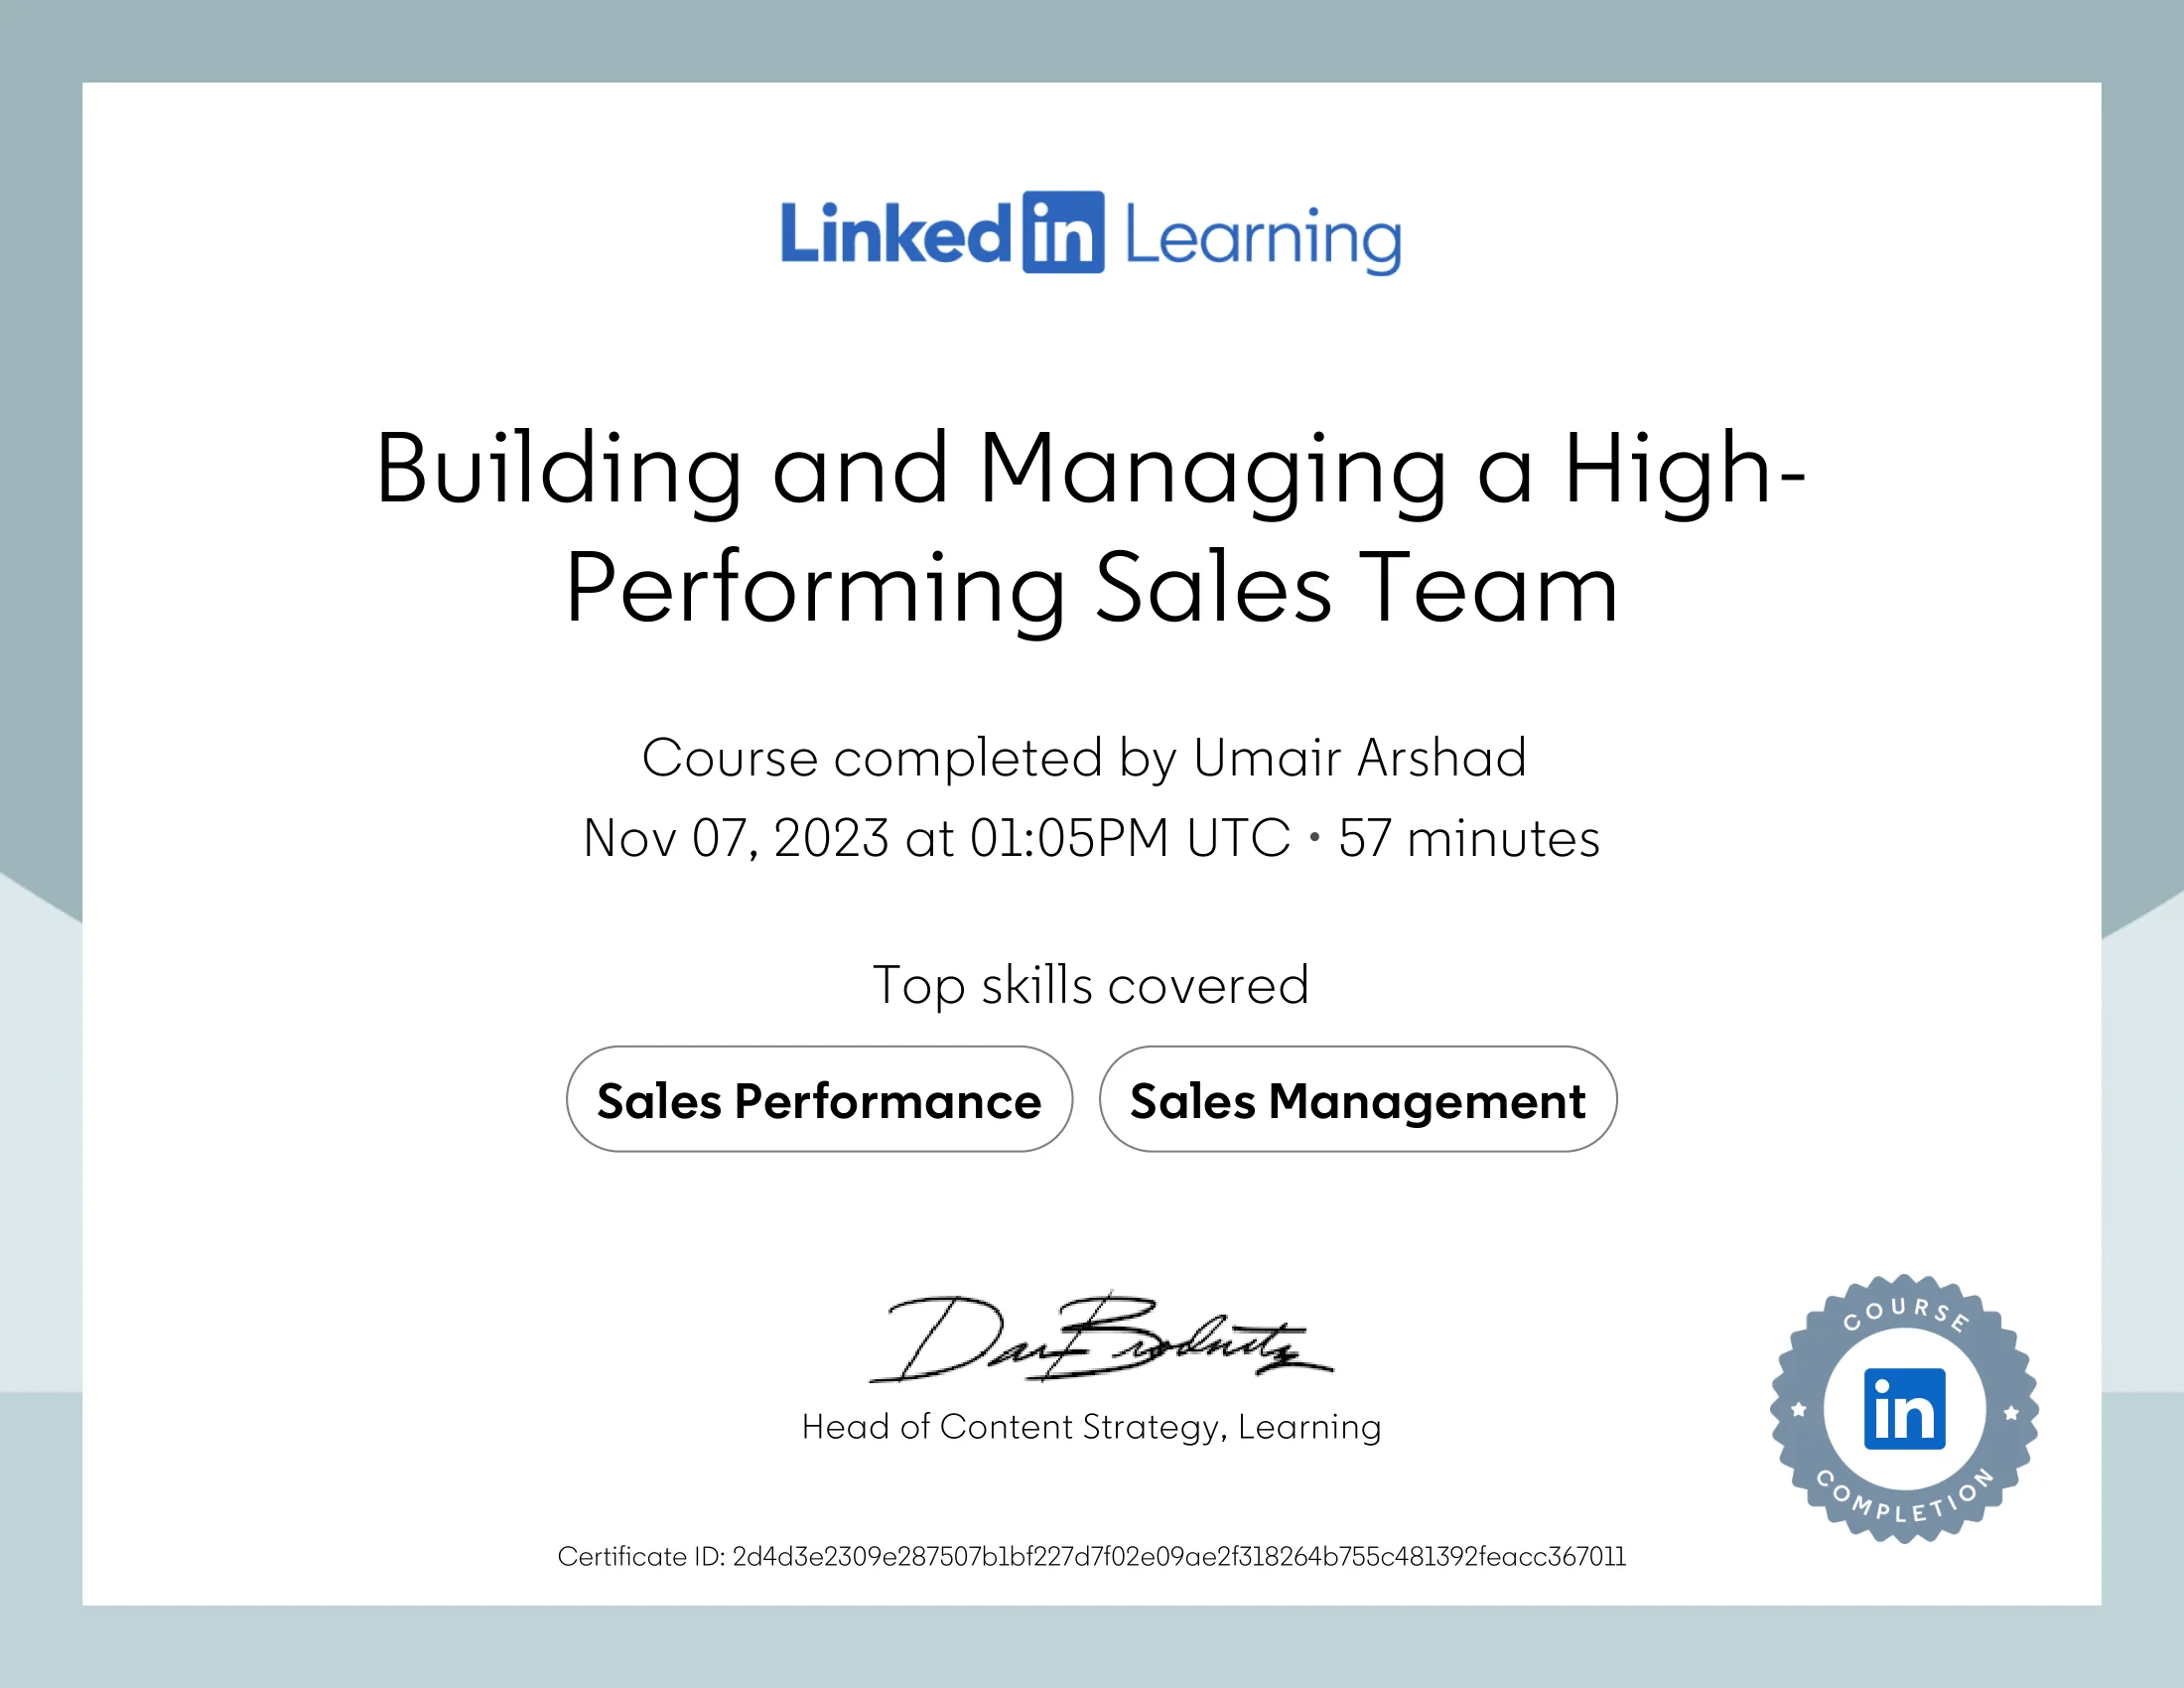 Certificate Of Completion_Building-and-Managing-a-High Performing-Sales-Team